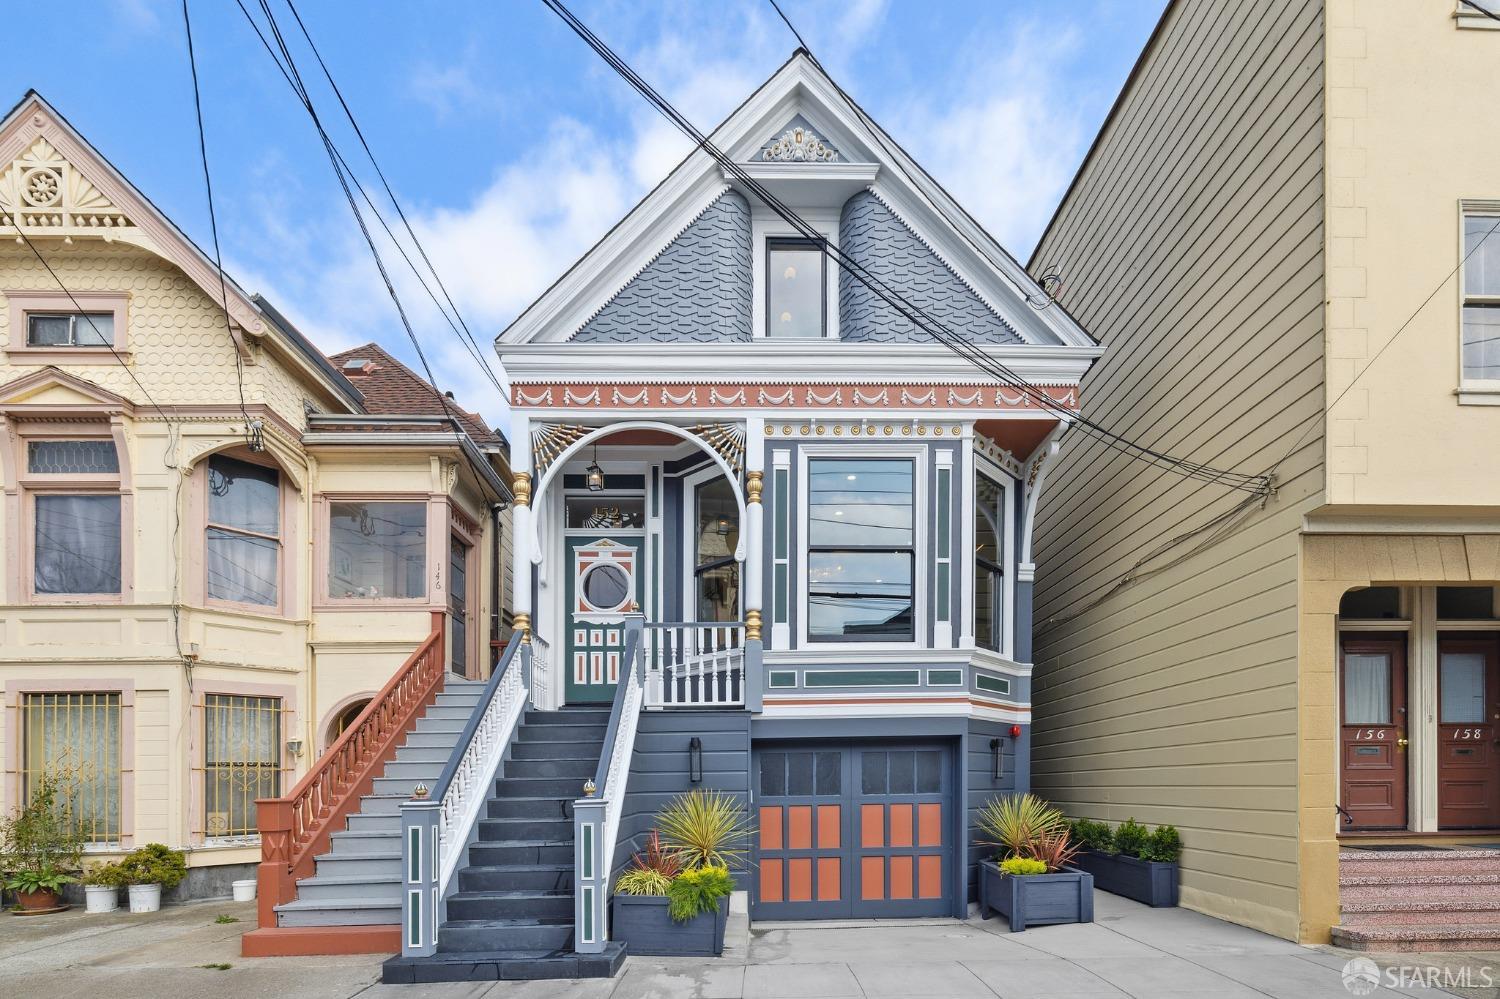 Step into modern elegance at 152 4th Avenue, a beautifully remodeled Victorian home in San Francisco's Lake Street neighborhood.  This classic-meets-contemporary gem showcases fabulous entertaining spaces, feat. a LR w/ stone fireplace, white oak floors set in a striking herringbone pattern & high ceilings with skylights providing an airy and open ambiance. Well-appointed kitchen with a central island clad in Italian marble, a stunning Italian range, a butler's pantry and breakfast nook. The DR with its wet bar, and flows into the lounge area overlooking the yard. A tucked away powder room offers additional convenience for your guests.  Upstairs, 3 well proportioned bedrooms & 2 baths, incl. a luxurious primary suite with sitting area, walk-in closet and terrace. The lower level offers a media room w/ wet bar & storage, 2 more bedrooms, one of them en-suite and 2 baths.The leveled backyard offers the perfect canvas for child play, gardening, and outdoor entertaining with a tiled patio area . A laundry room,1-car garage w/ EV charger, radiant floor heating, and built-in speakers add practicality to luxury living. New systems throughout incl. new plumbing, electrical, HVAC, sprinklers, foundation & roof. A+ location close to local restaurants & shops and minutes from the Presidio.